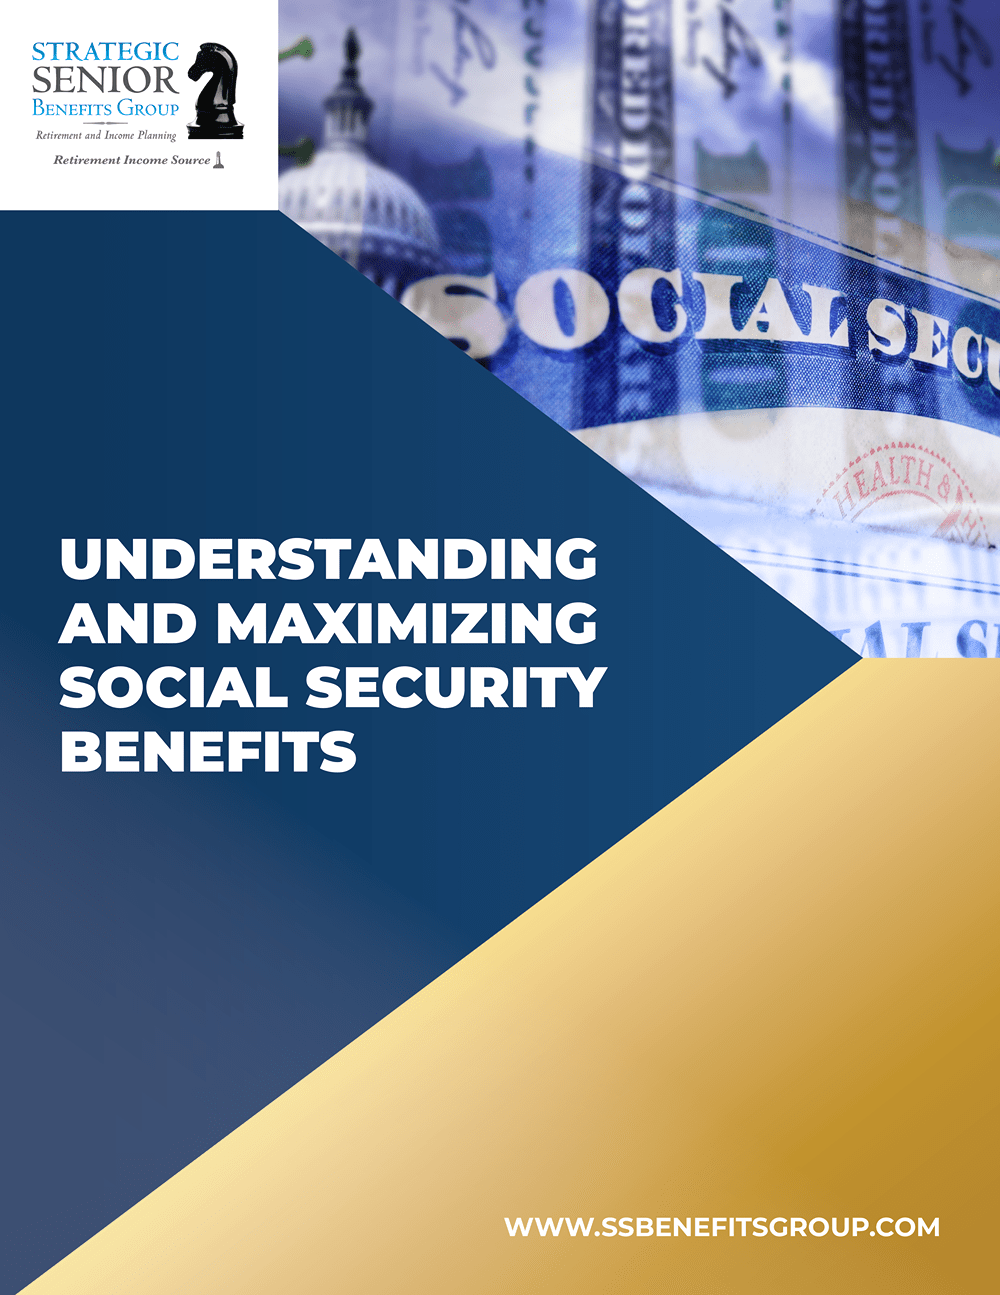 Strategic Senior Benefits Group - Understanding and Maximizing Your Social Security Benefits-1